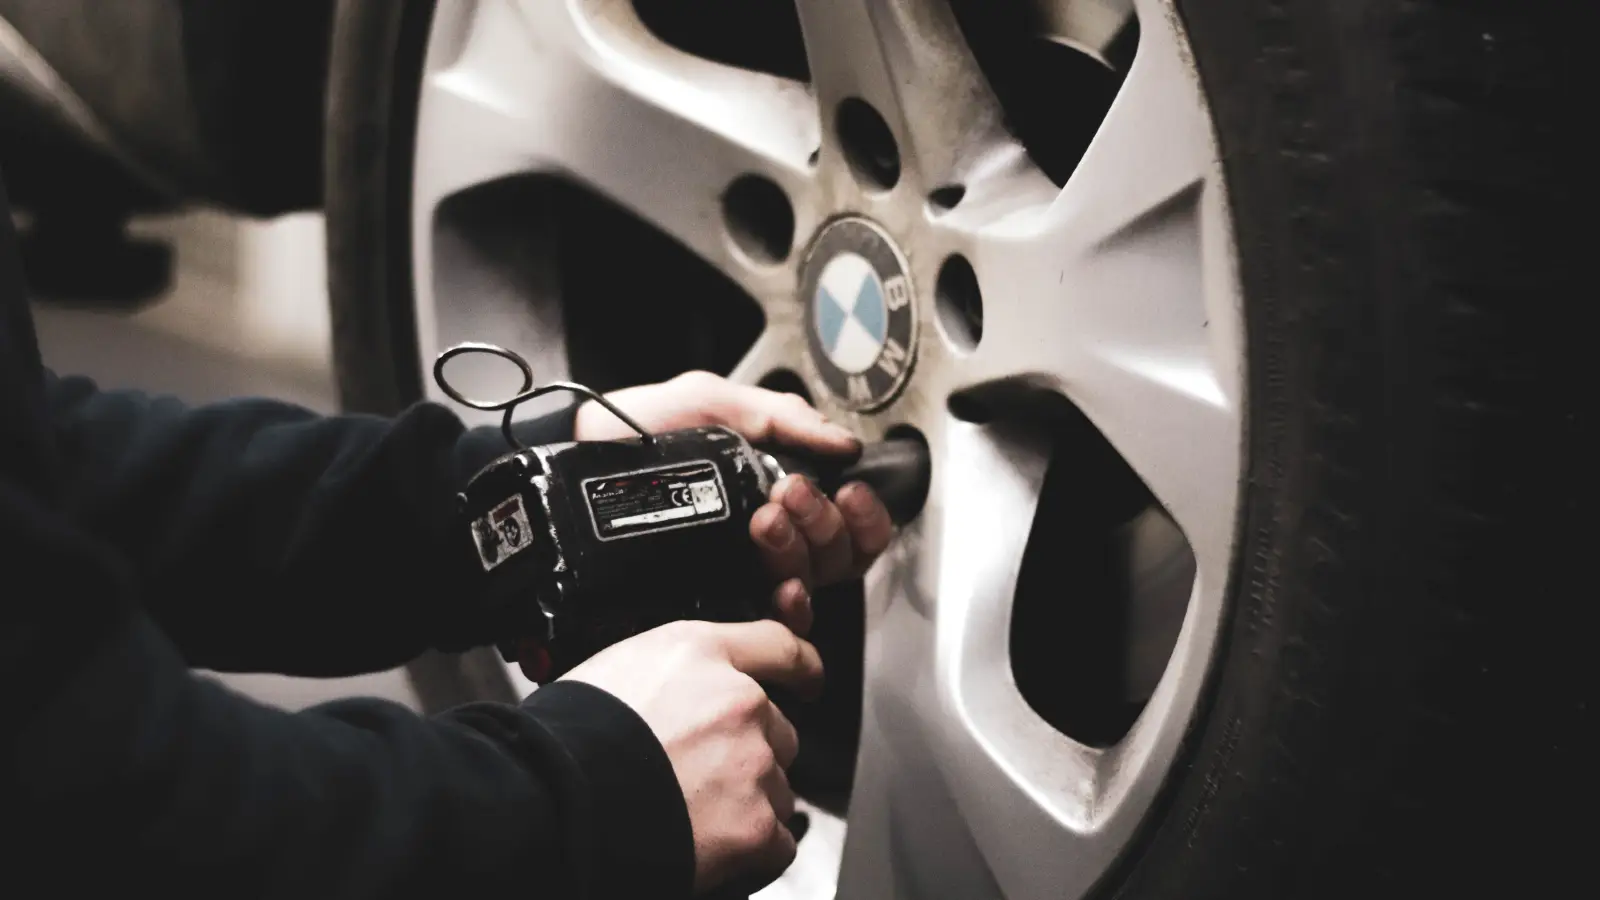 Replacement brake pads and discs cost